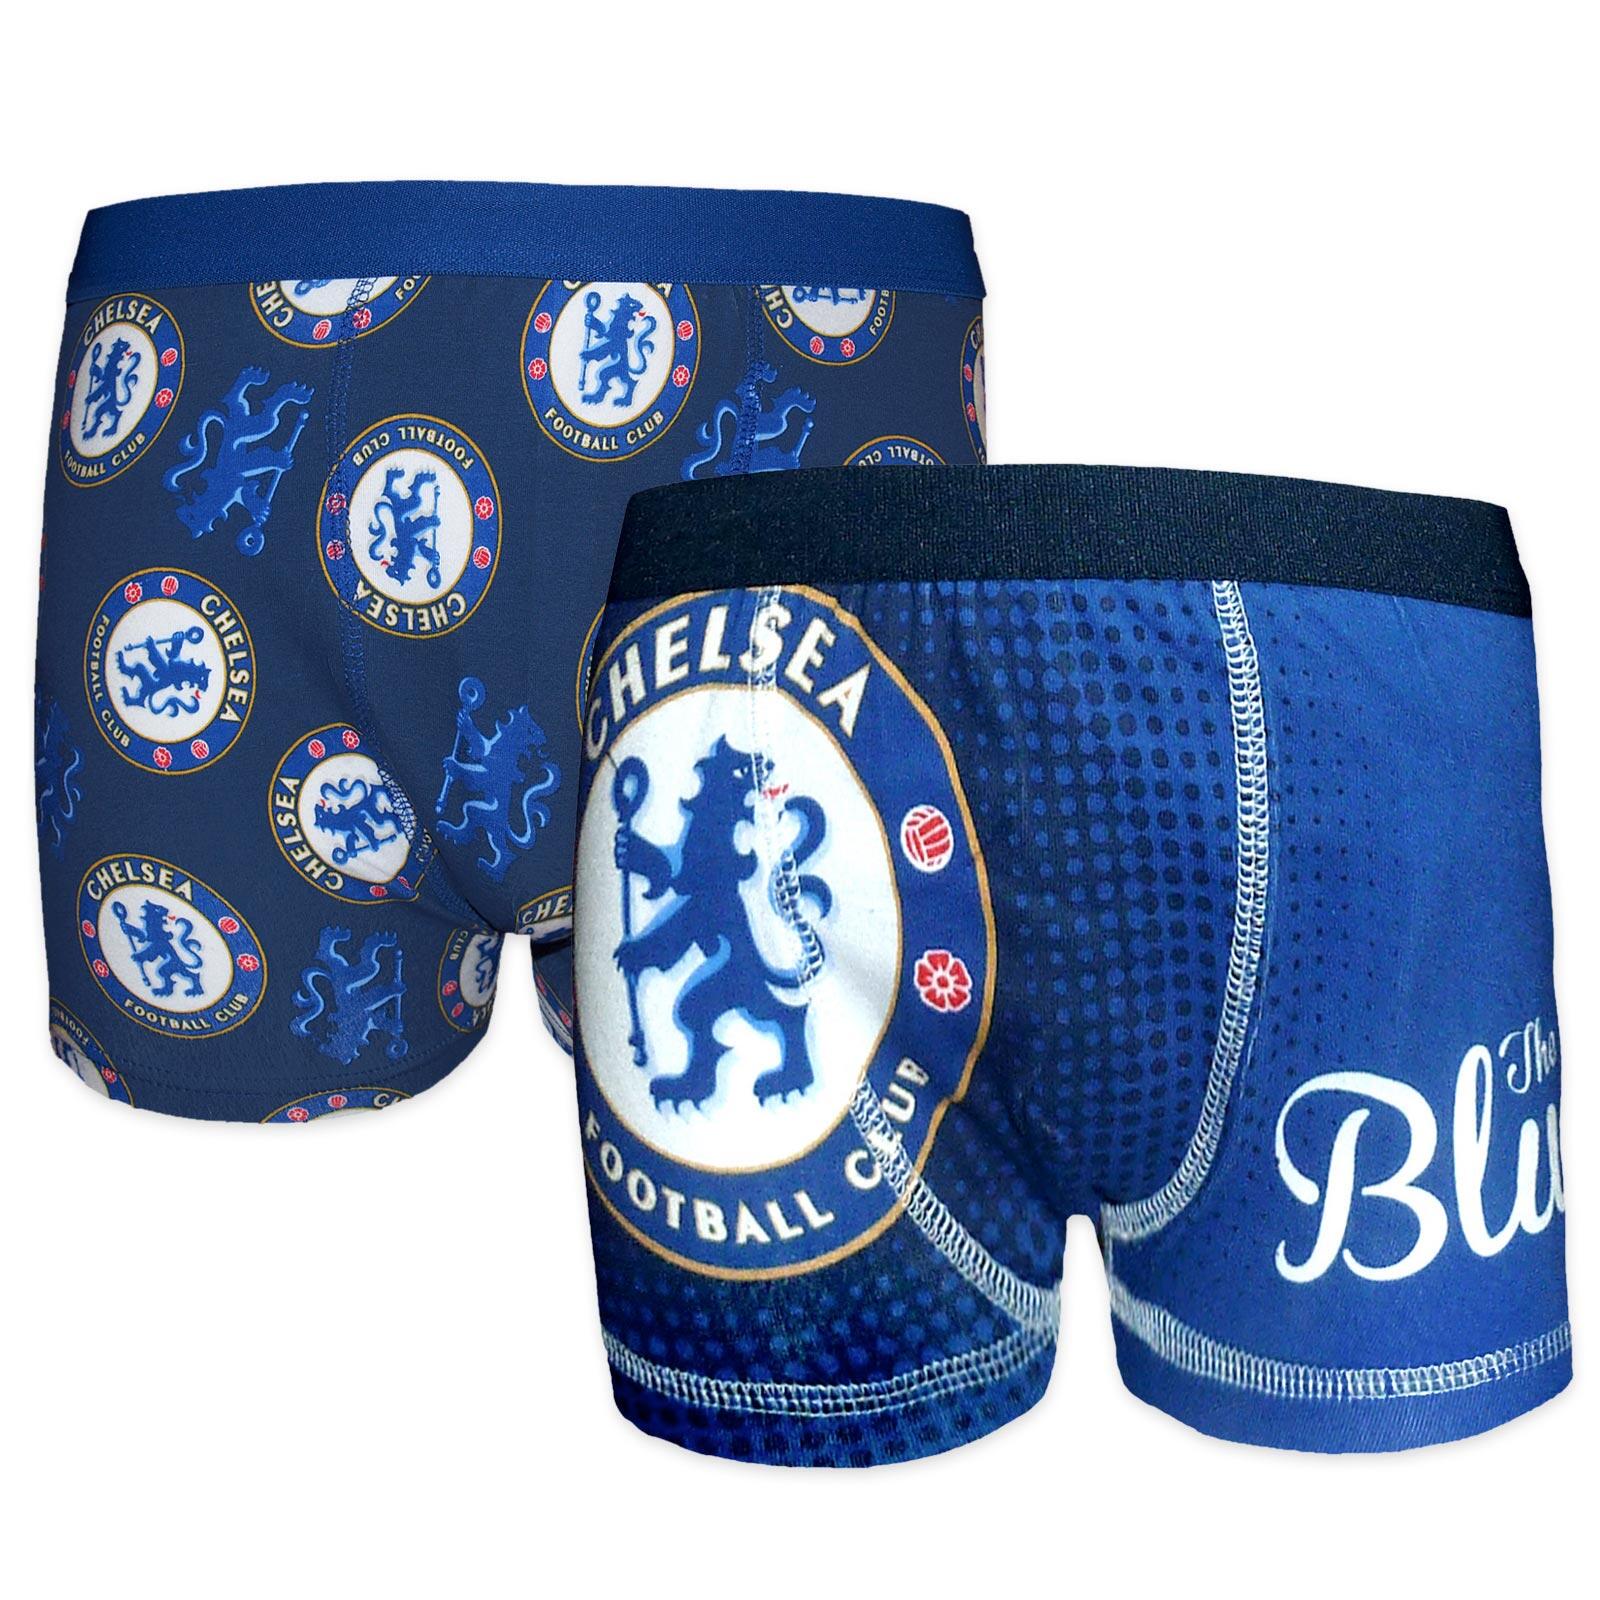 CHELSEA Chelsea FC Boys Boxer Shorts 2 Pack OFFICIAL Football Gift